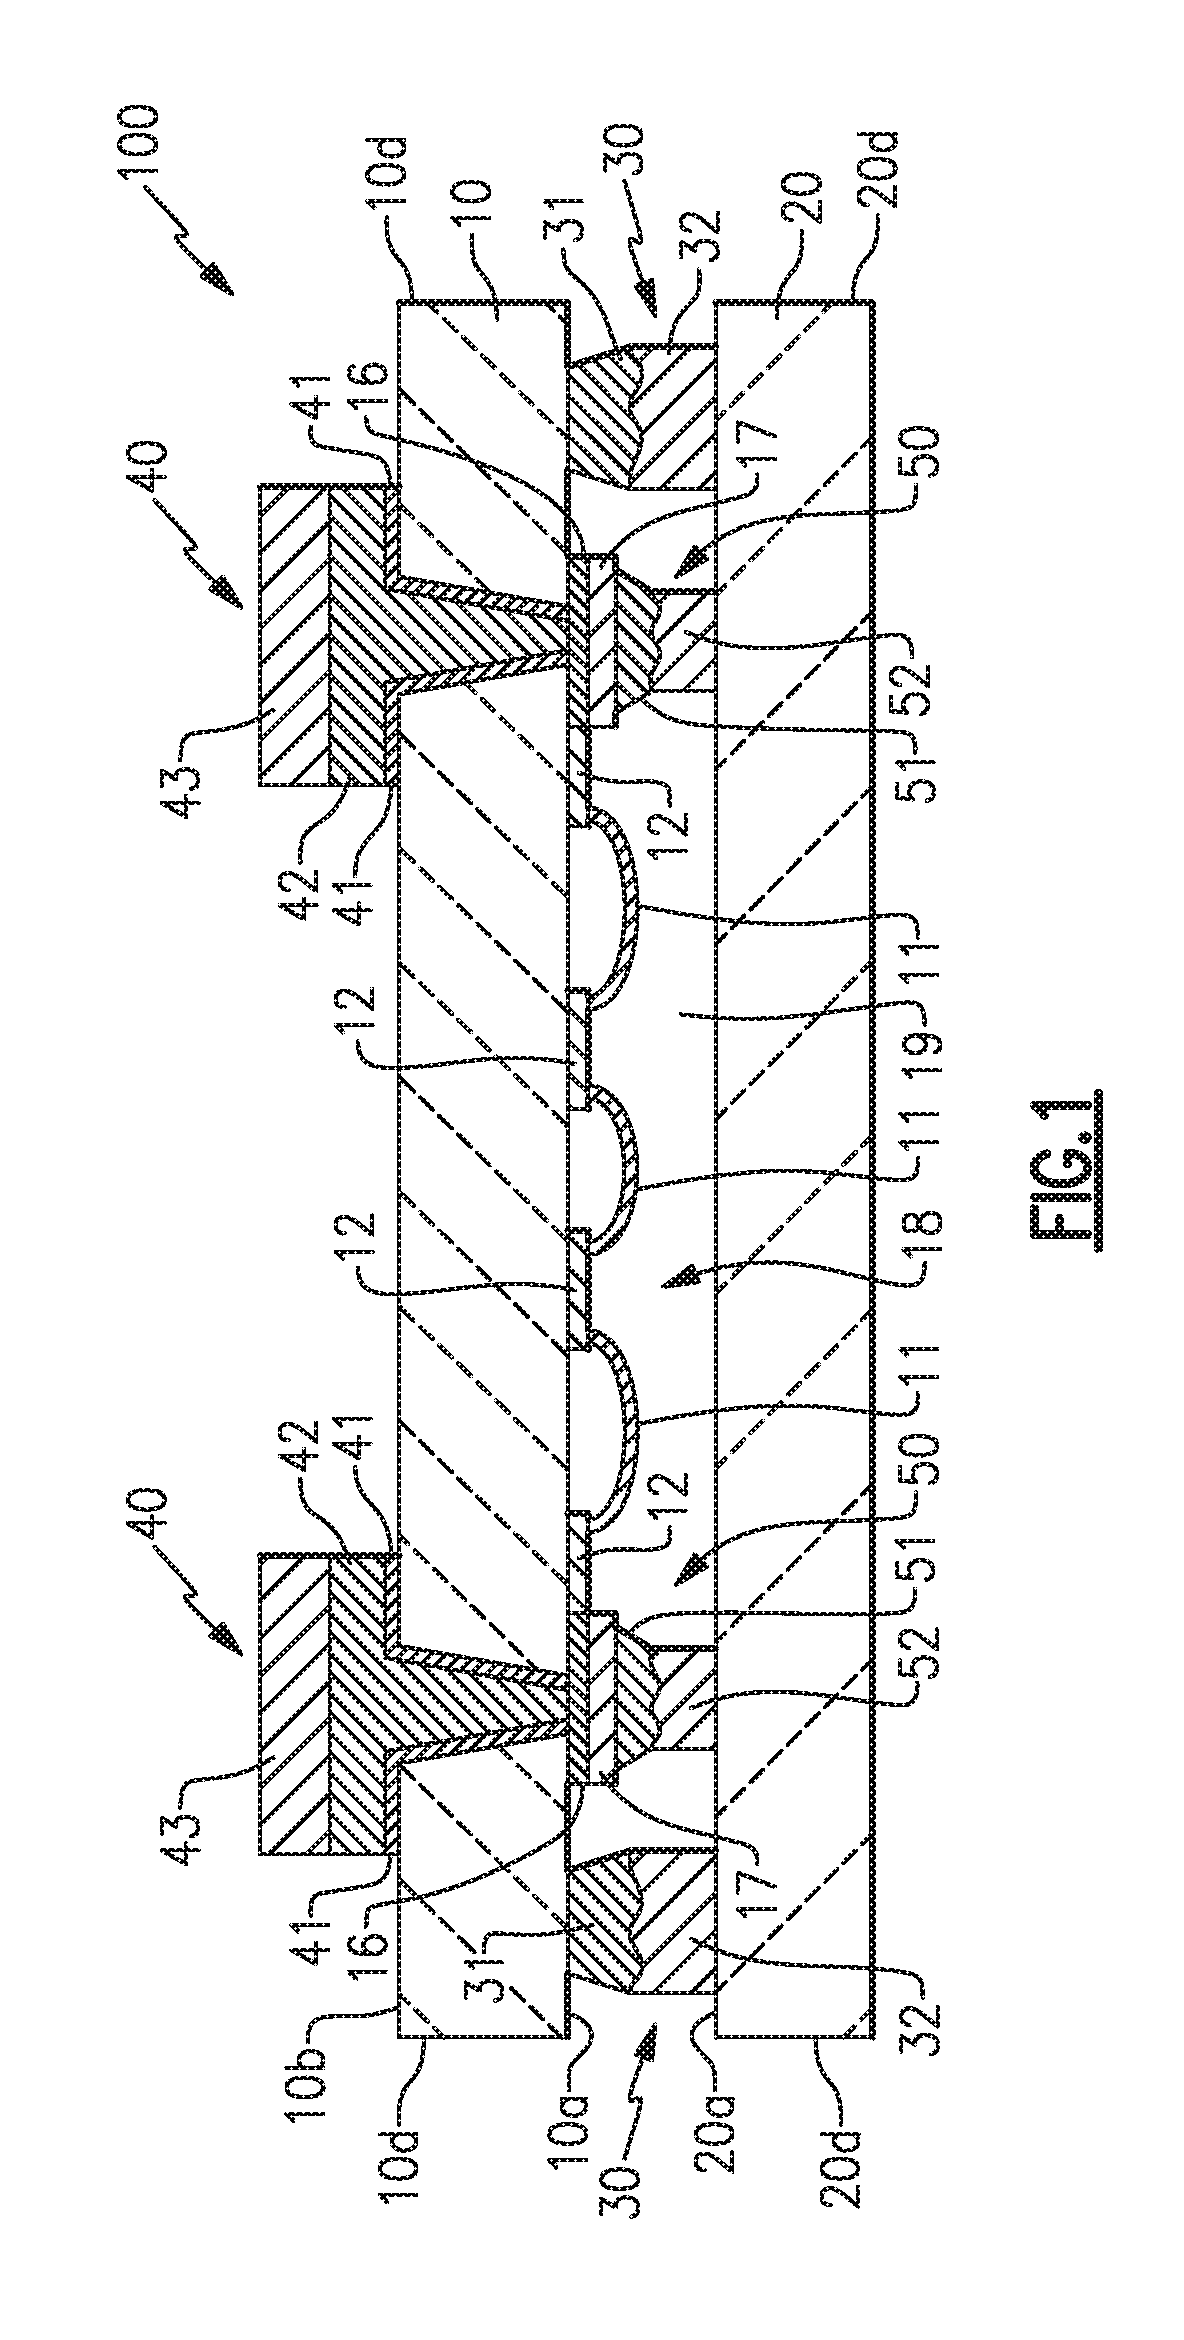 Methods of manufacturing electronic devices formed in a cavity